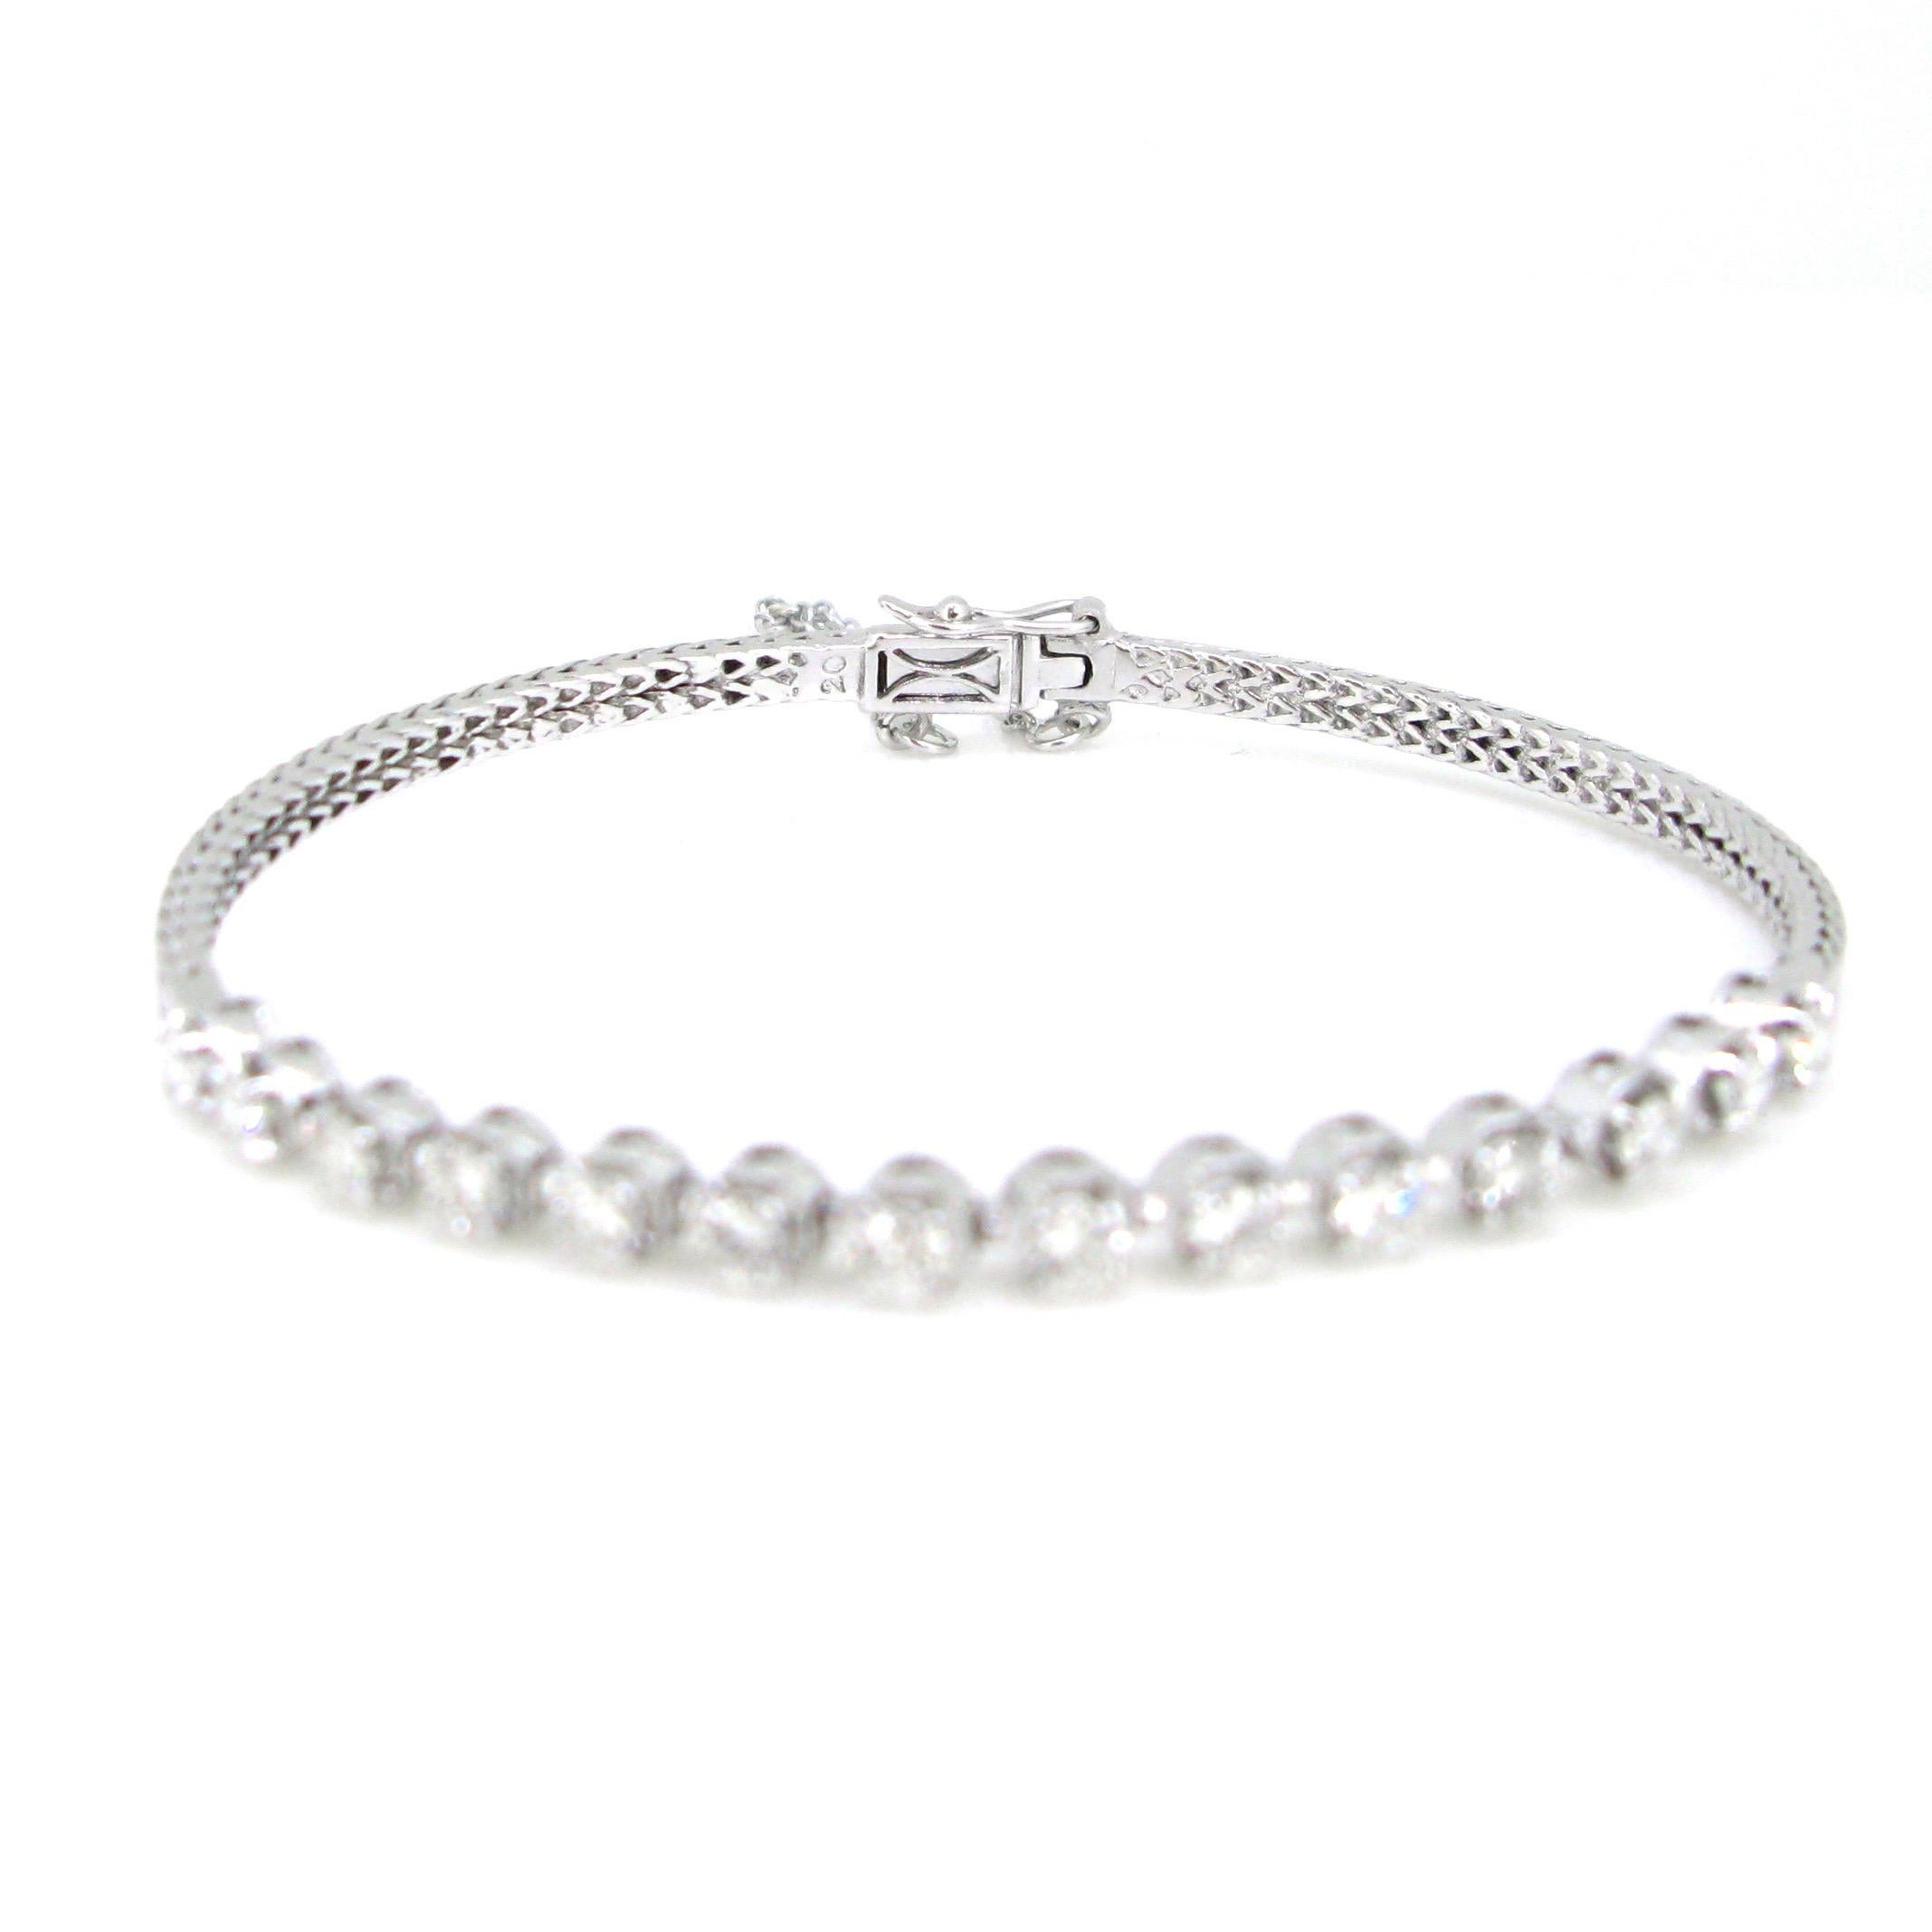 This elegant bracelet is semi rigid. It comprises a moving line set with 14 brilliant cut diamonds with a total carat weight of 1.10ct approximately. There are 2 bangles on each extremity of the lines. It closes firmly. It is secured with a clasp